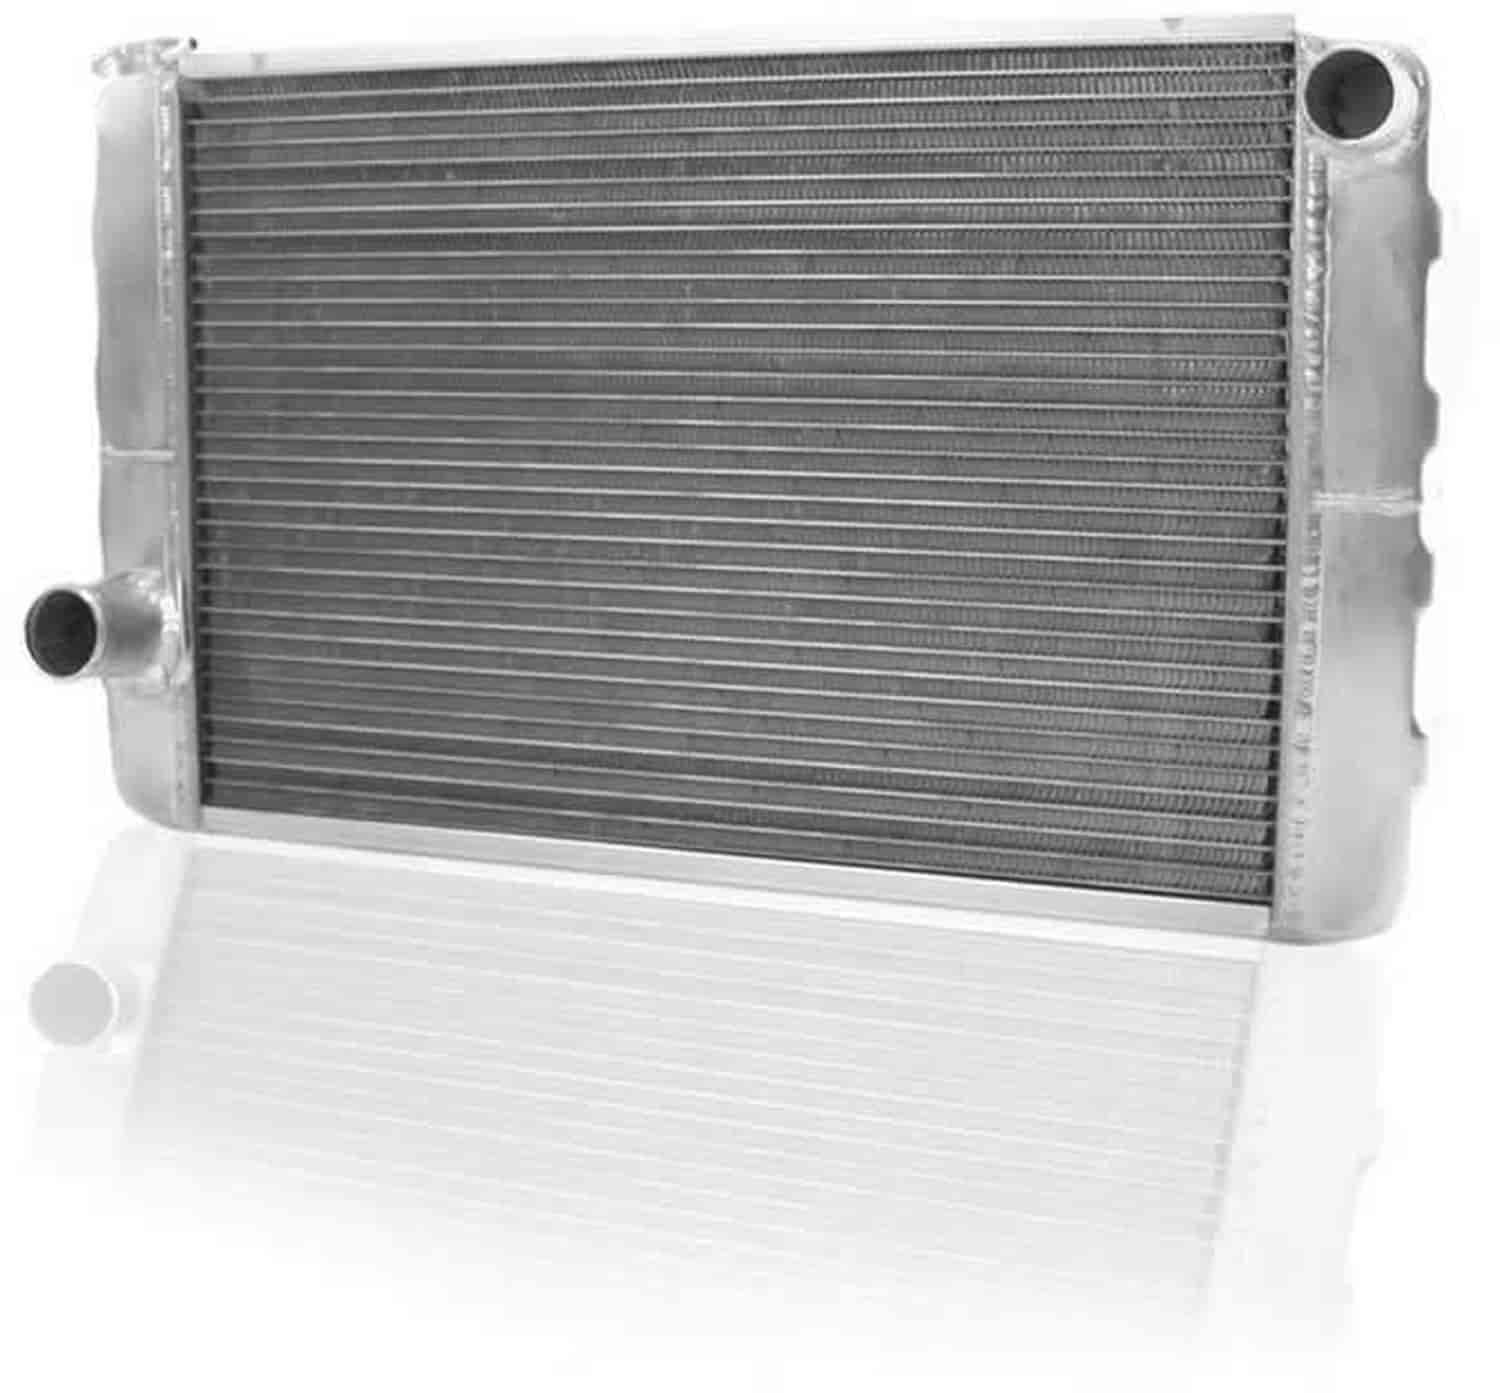 ClassicCool Universal Fit Radiator Single Pass Crossflow Design 26" x 15.50" with Straight Outlet